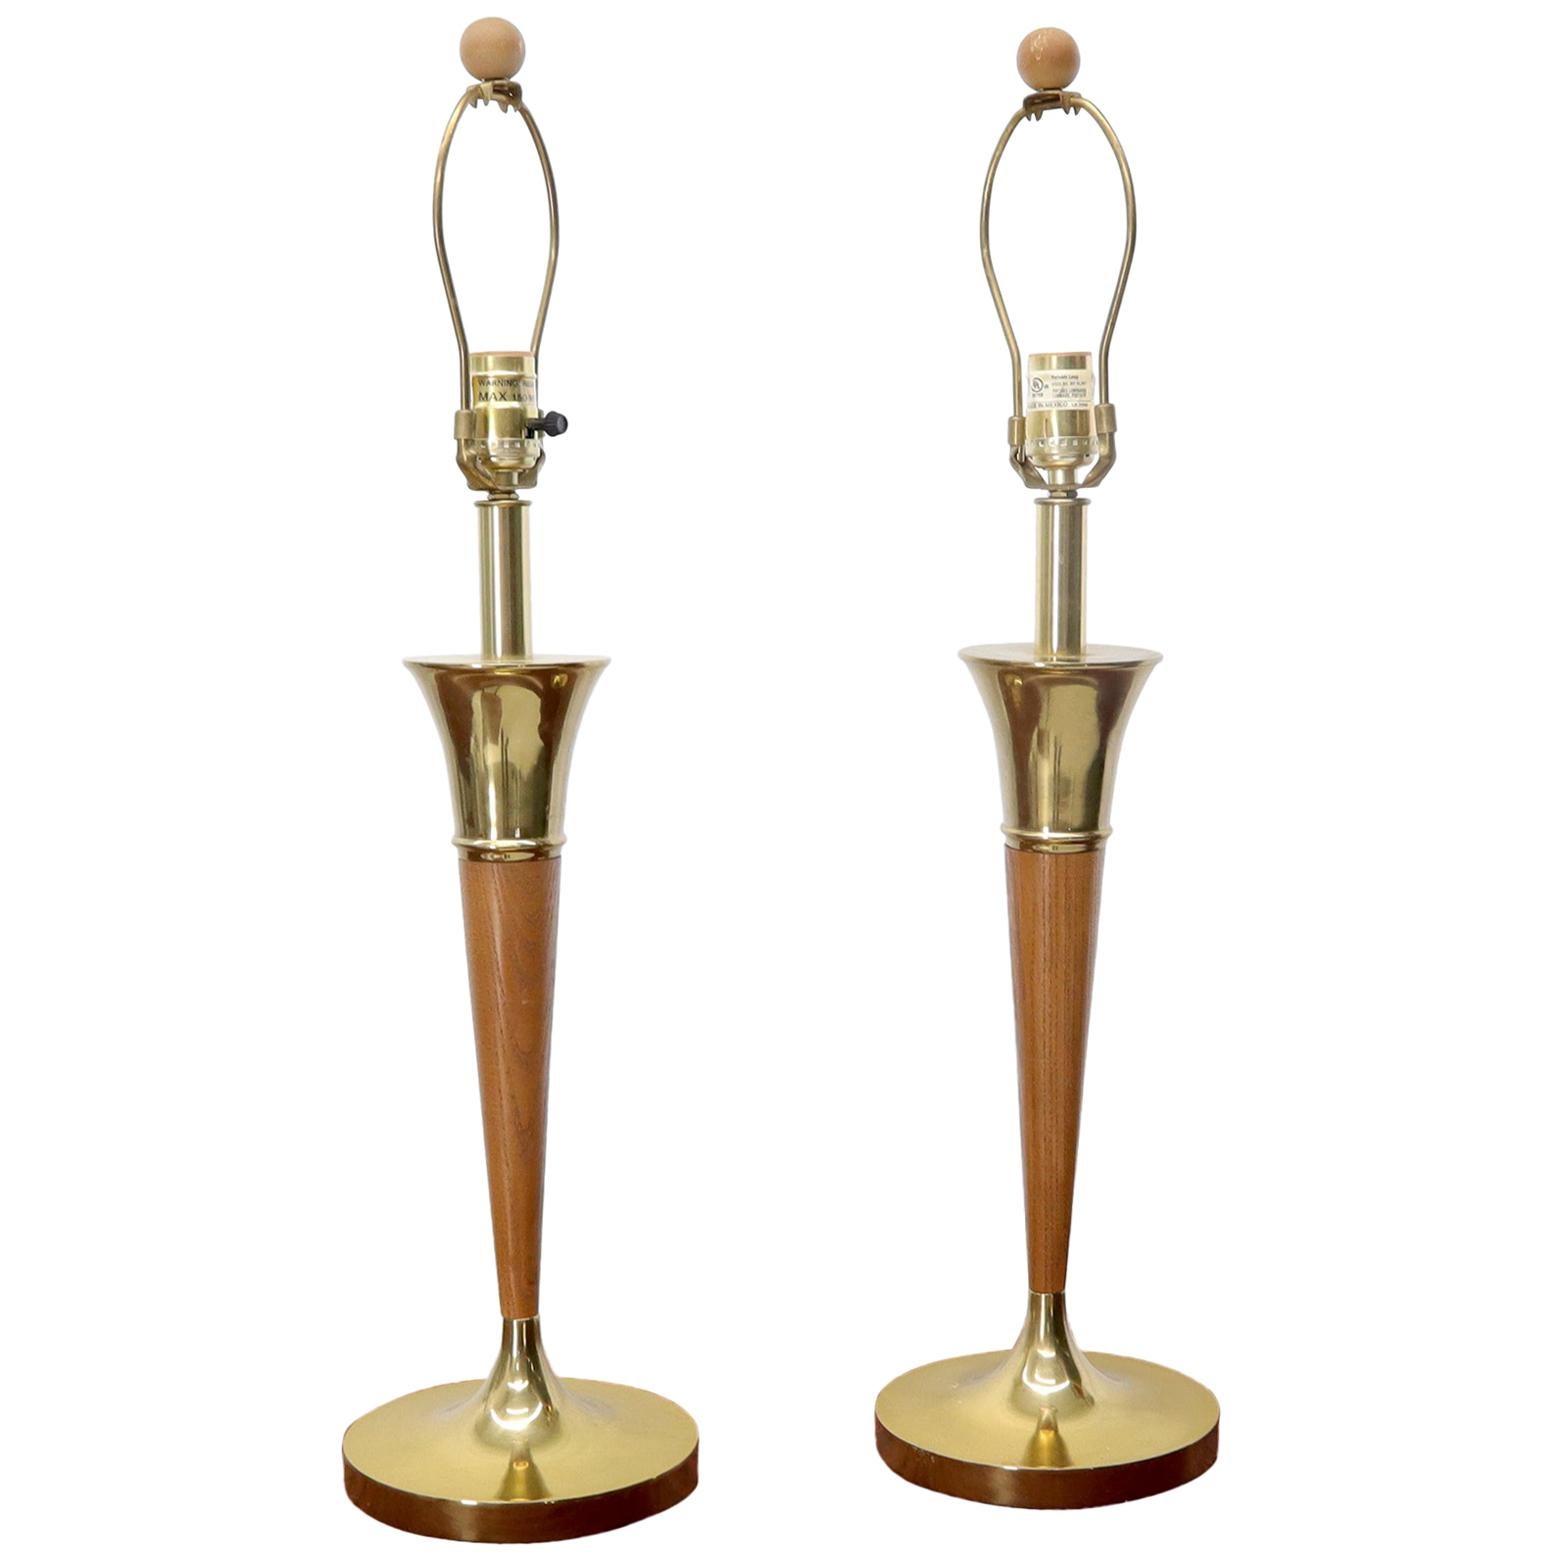 Pair of Walnut and Brass Mid-Century Modern Table Lamps